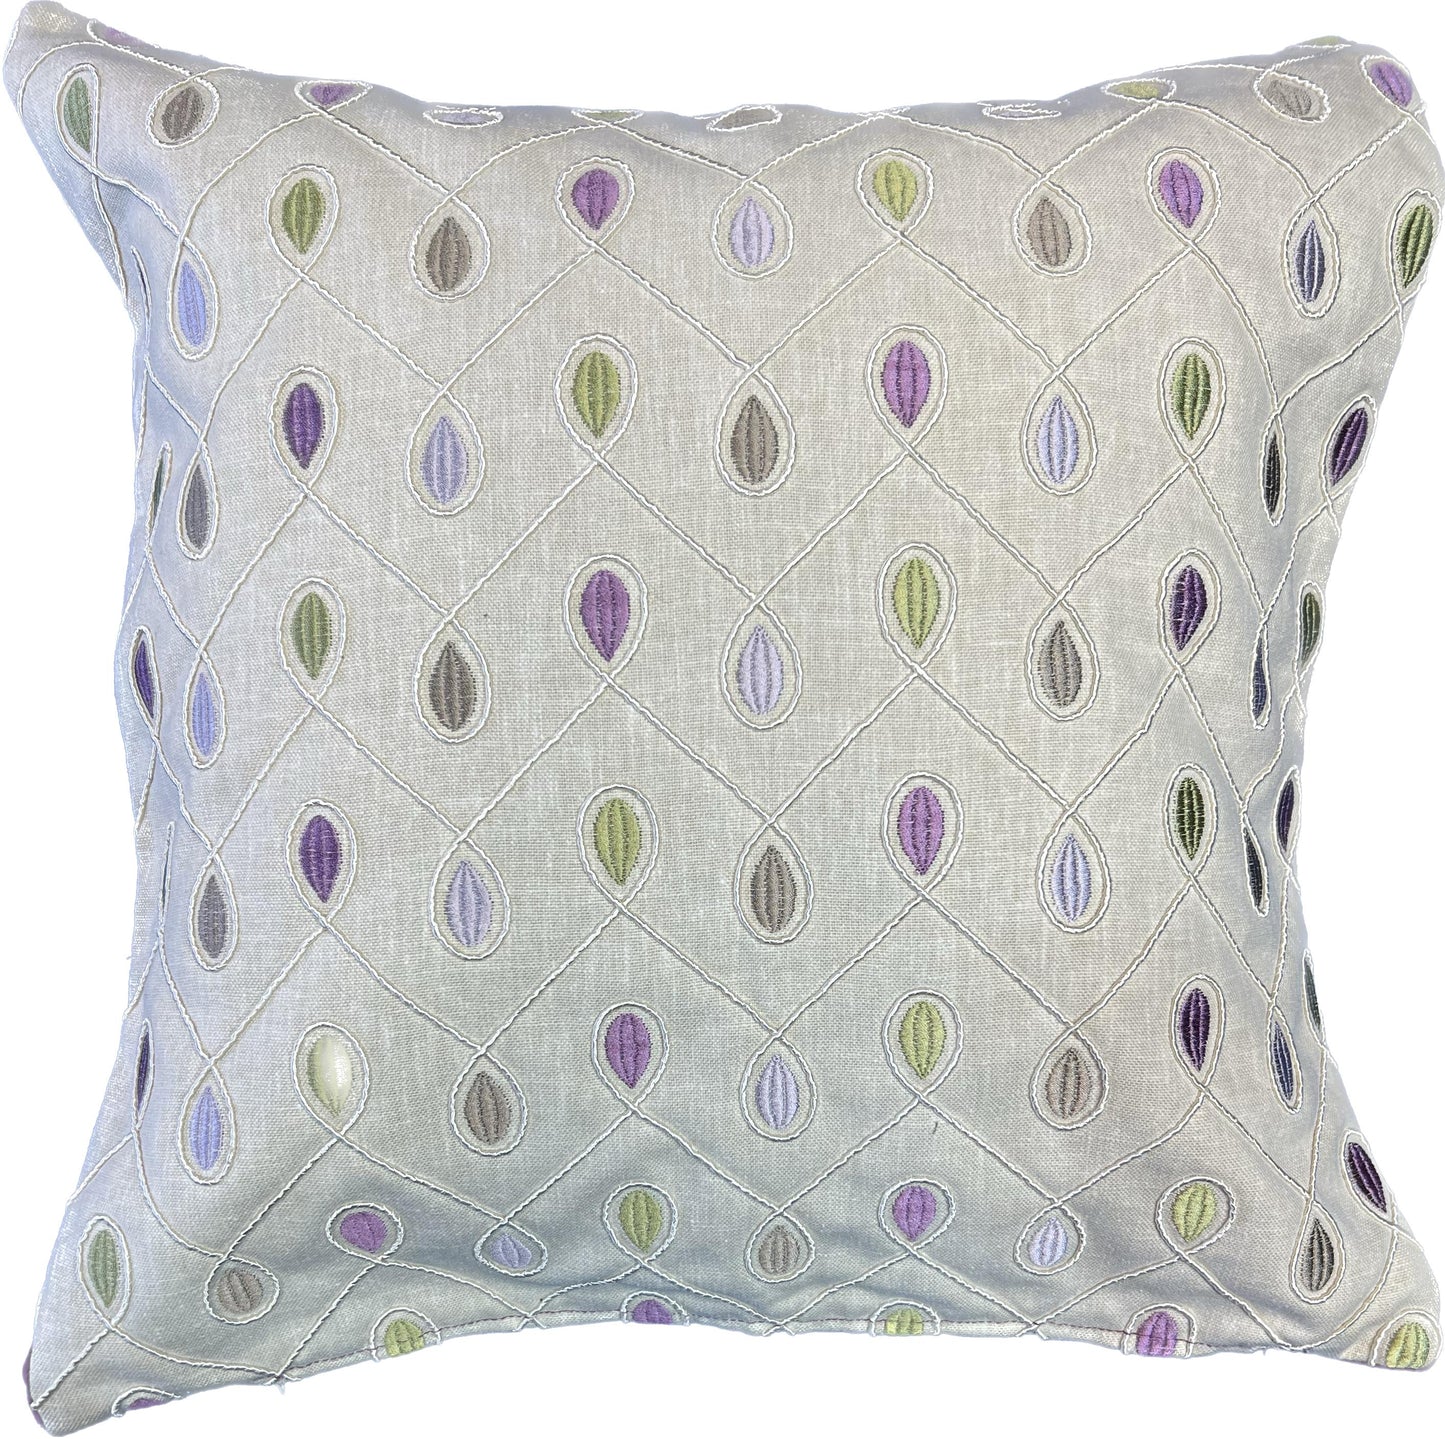 18"x18"  2-Sided Pillow Cover - Face: Clarke & Clarke: F0936/03 Healey - Heather / Back: Solid